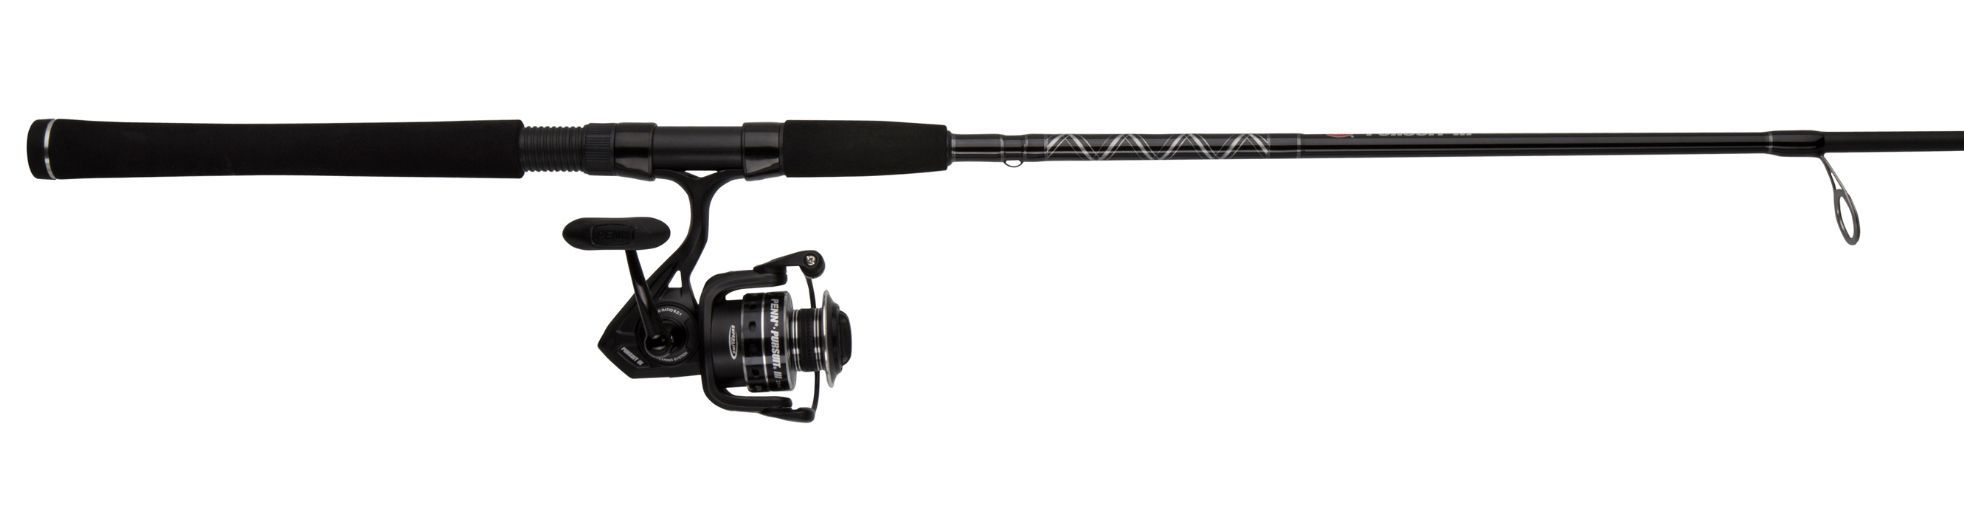  PENN 7' Pursuit IV 2-Piece Fishing Rod and Reel